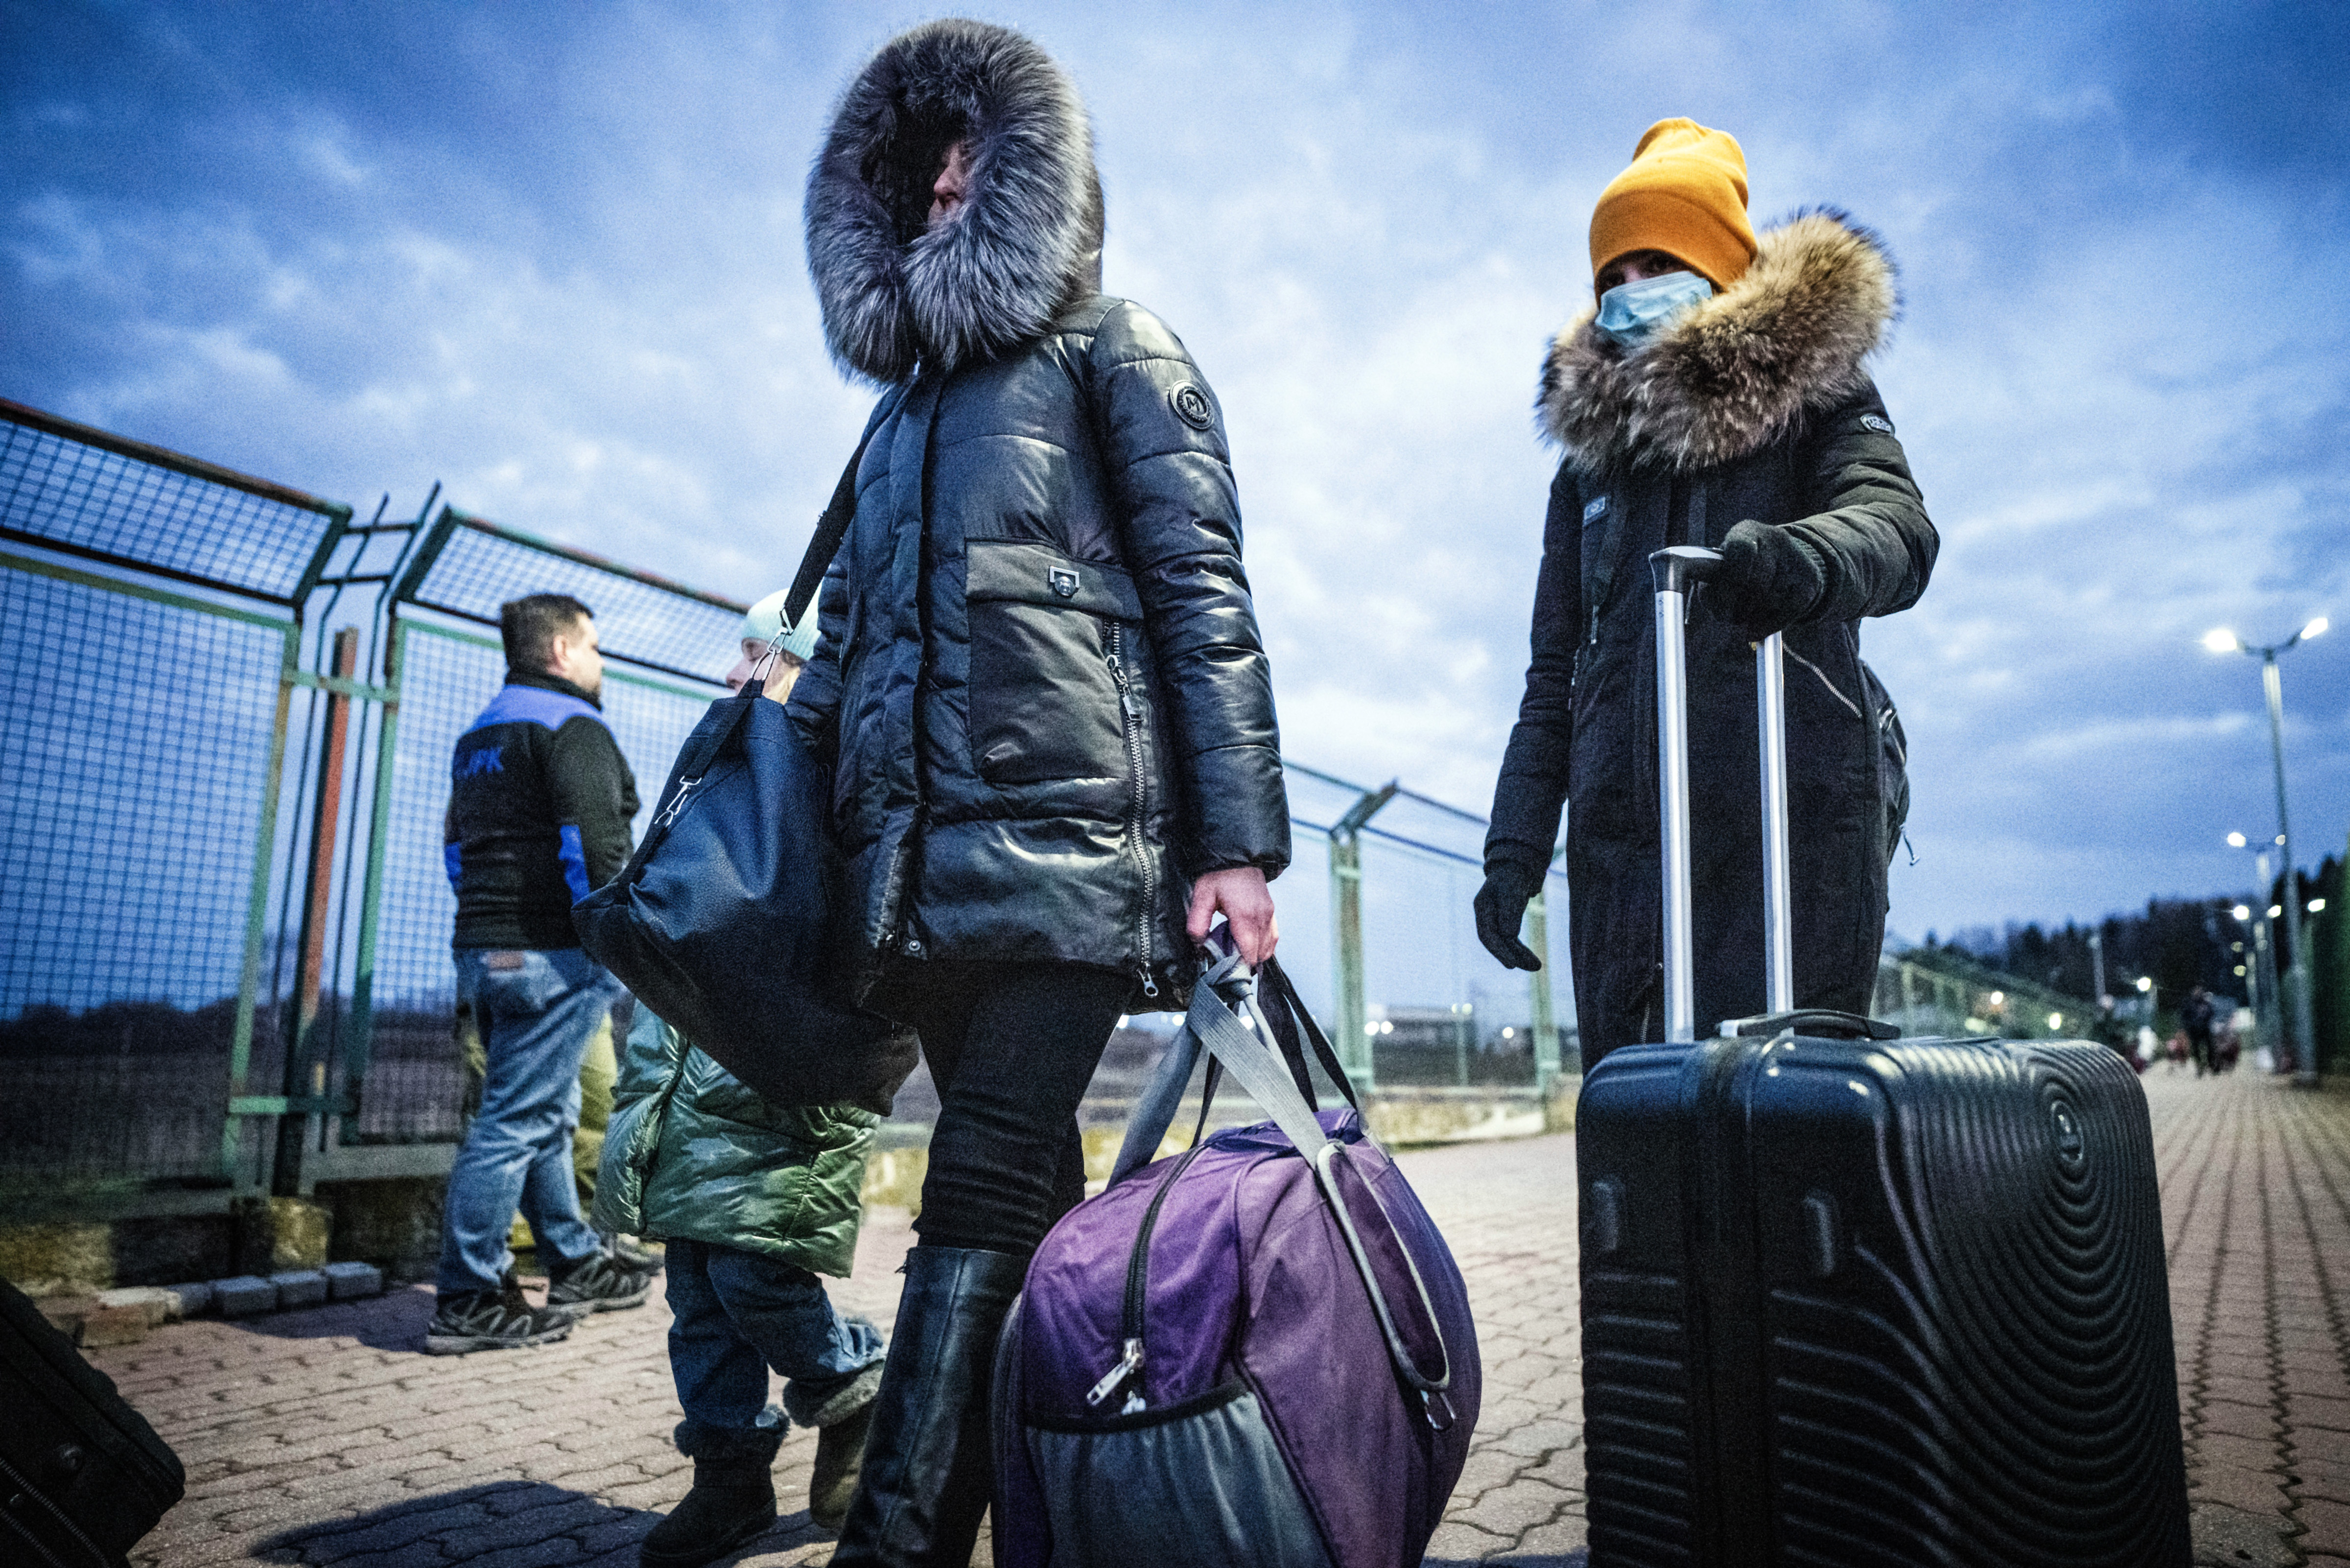 Refugees from Ukraine arrive in Medyka, Poland, after crossing the border from Shehyni in Ukraine on February 25.